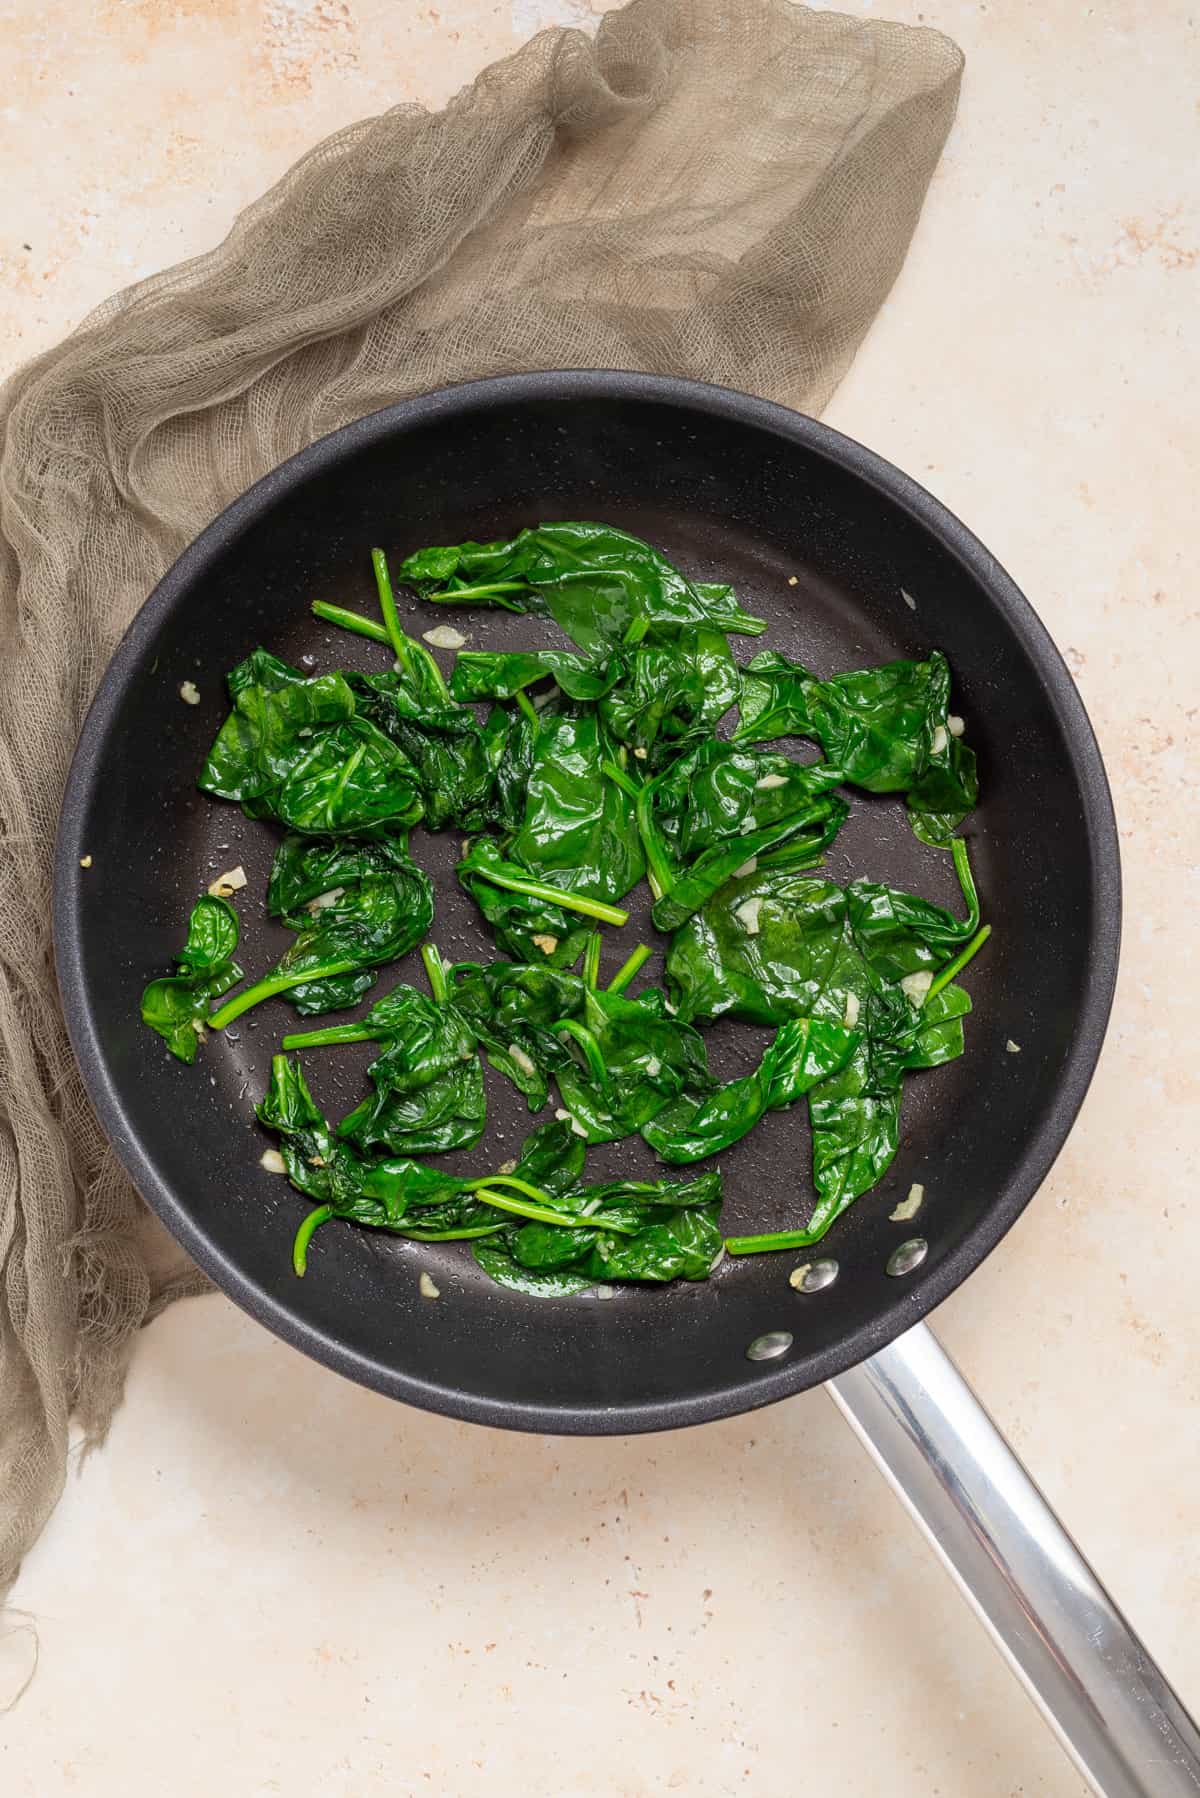 An overhead image of spinach and minced garlic in a skillet.